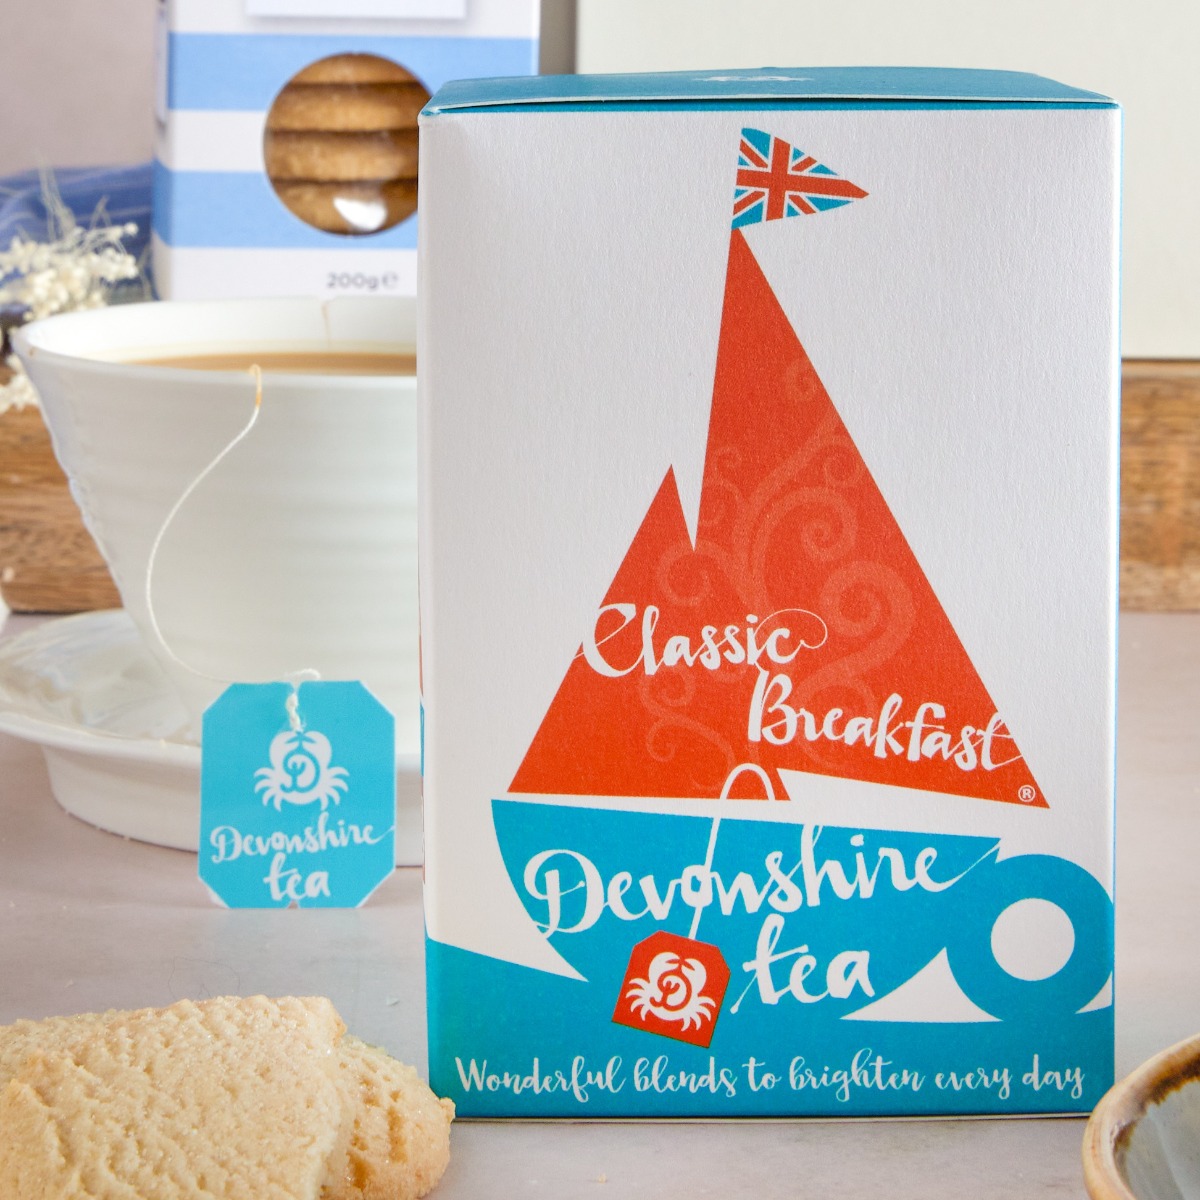 Devonshire Tea box of tea with cup in the background